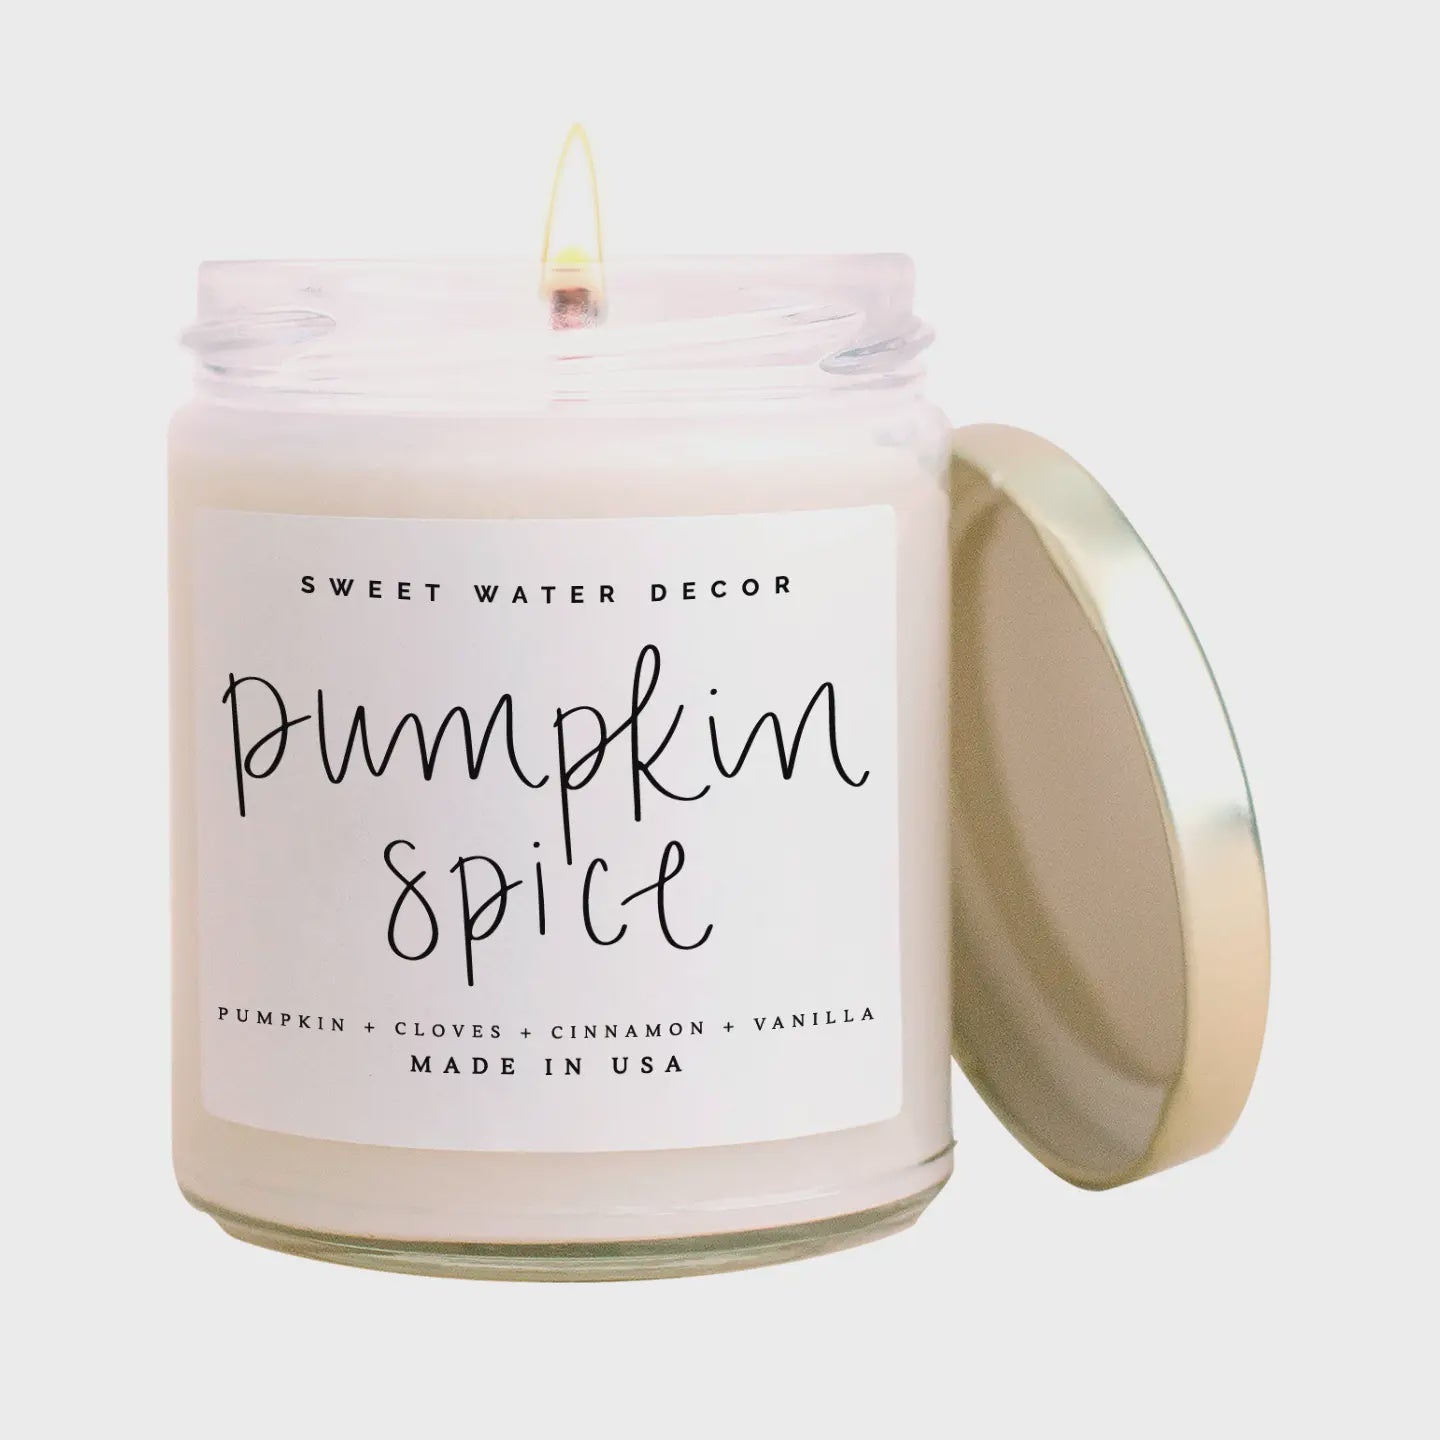 The Pumpkin Spice Soy Candle in Clear Jar by Sweet Water Decor